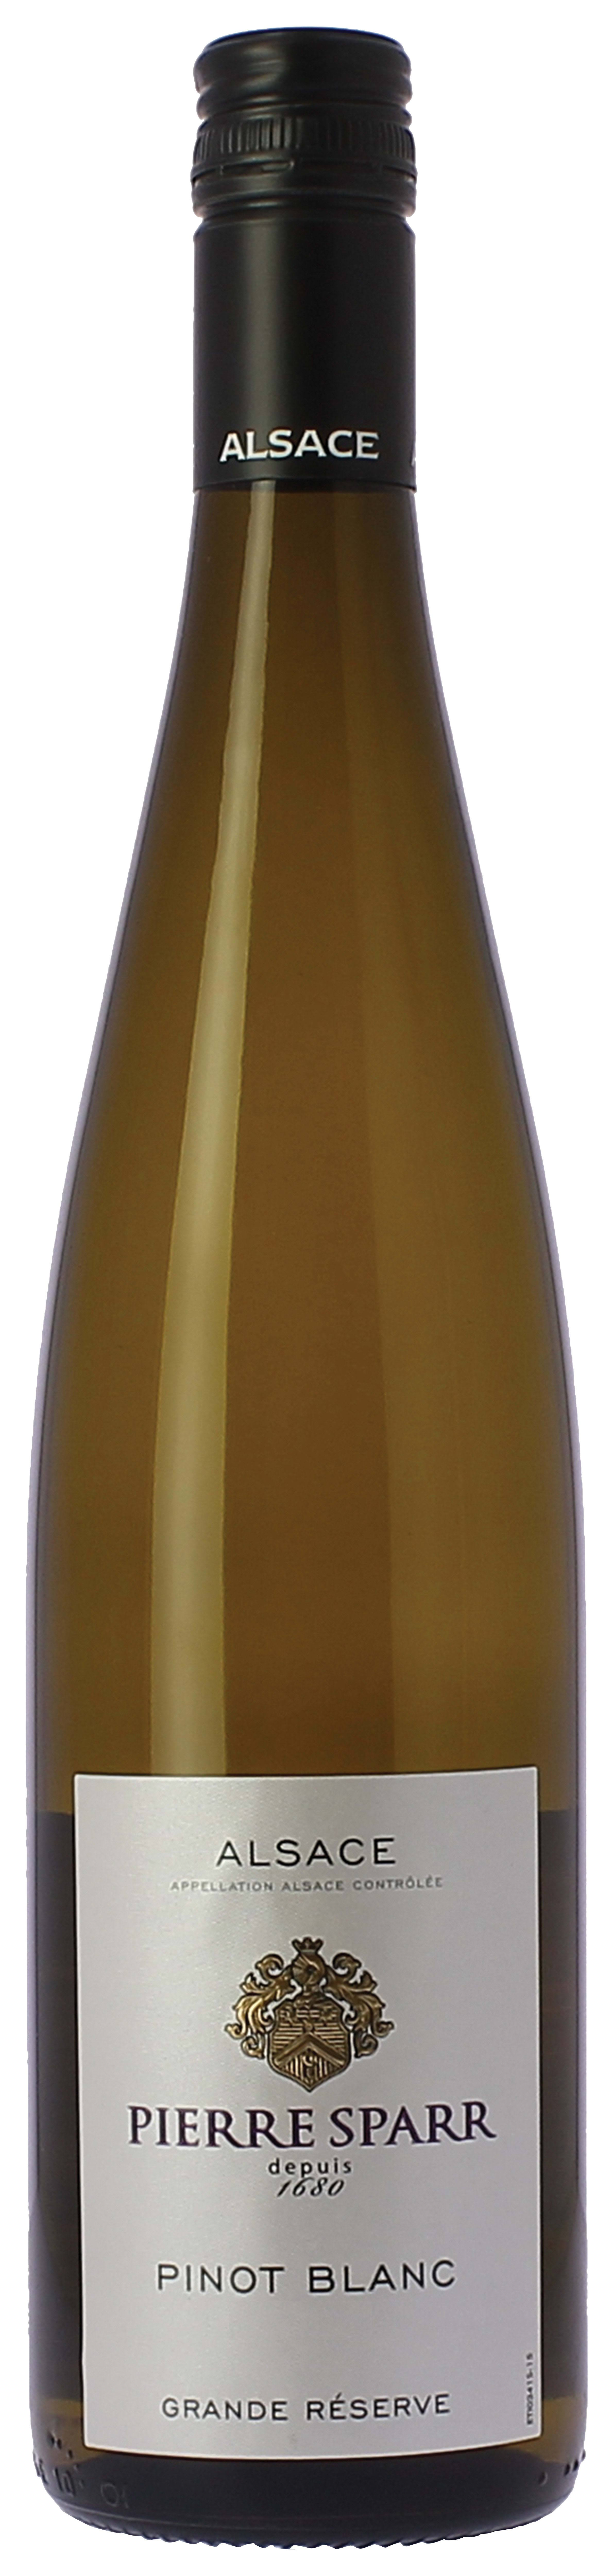 Pierre Sparr Pinot Blanc Reserve - Alsace, France